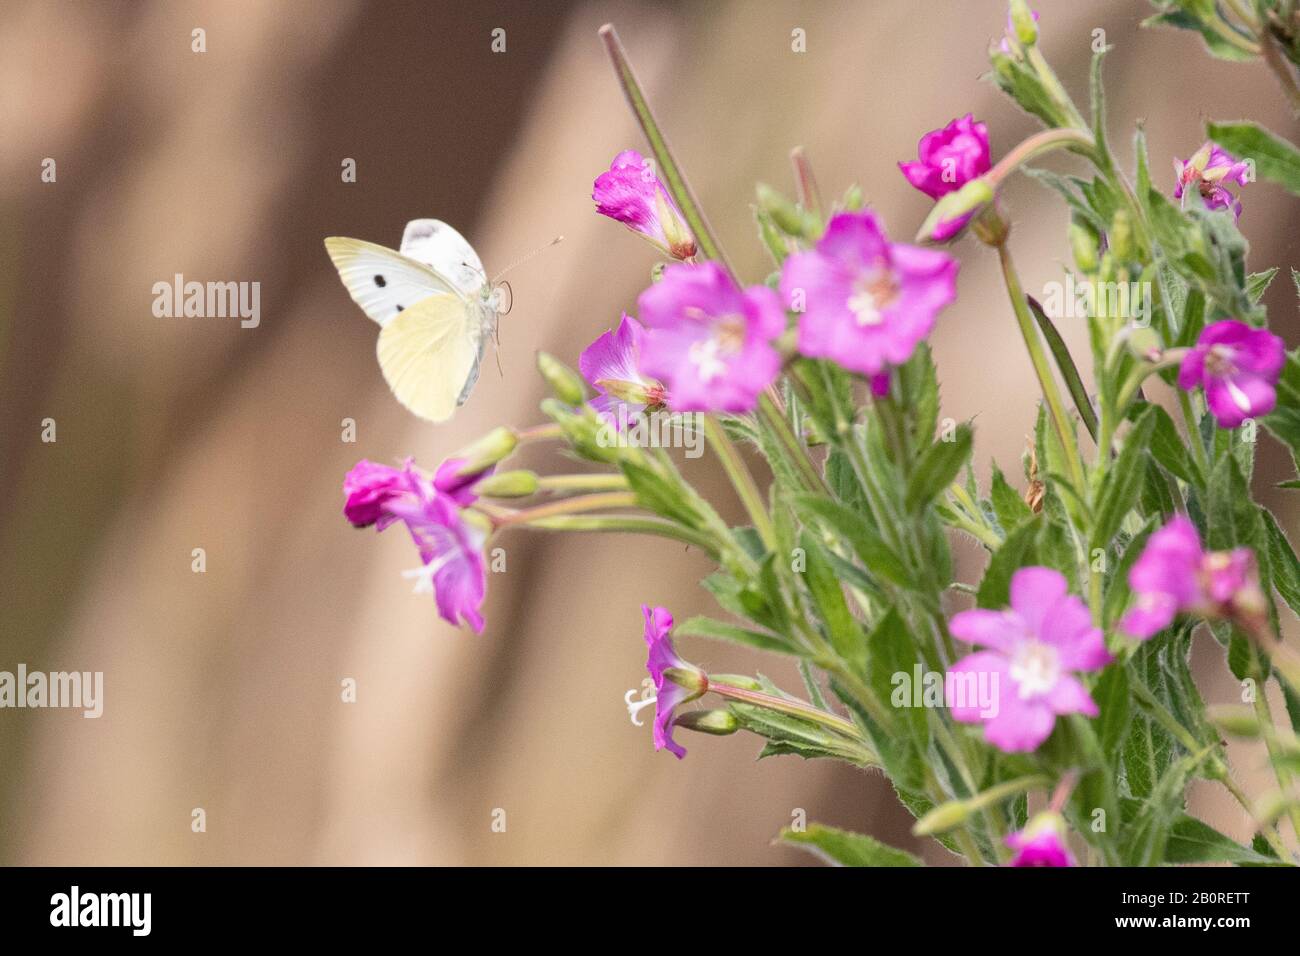 A large white butterfly flying through vibrant pink flowers Stock Photo